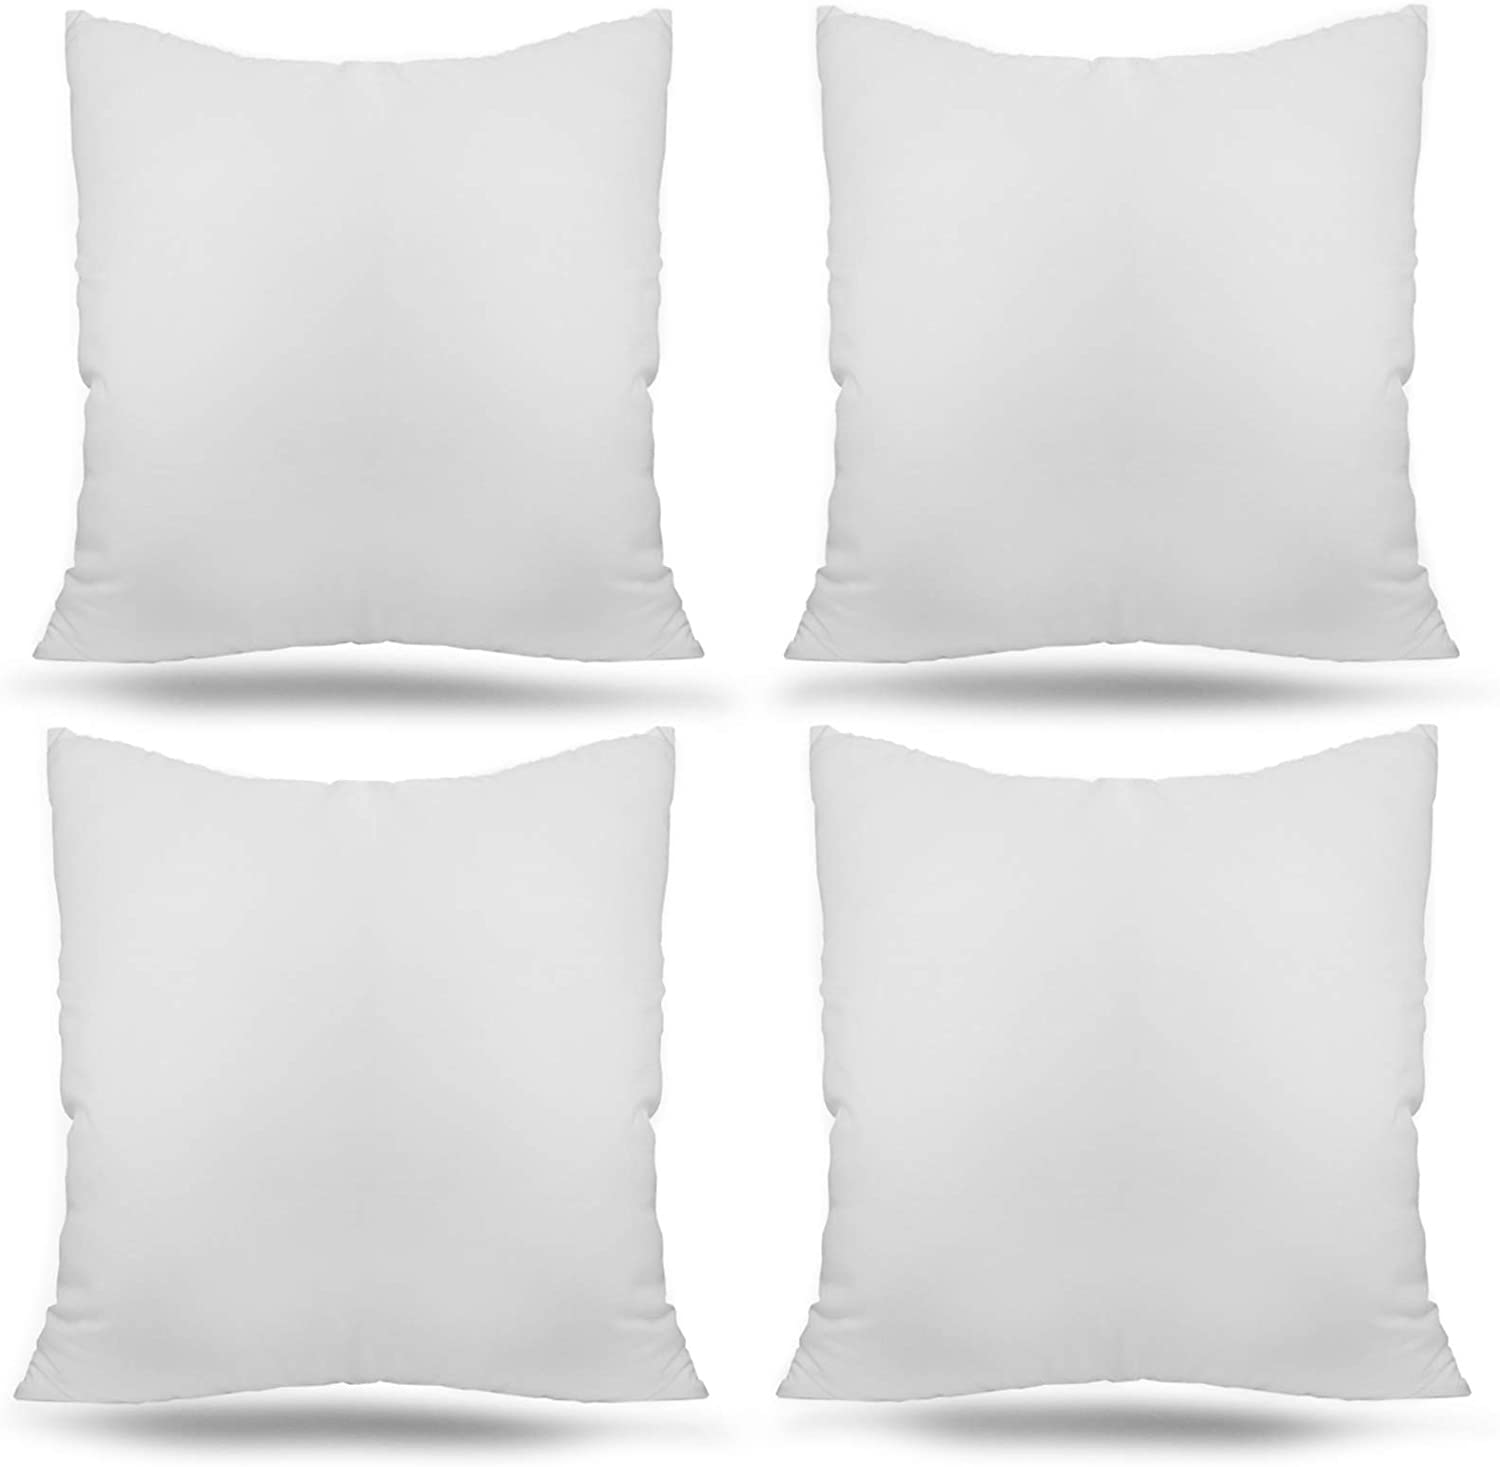 Ogrmar High-Resilient PP Cotton Fill Throw Pillows 18×18-Inch, 4-Pack